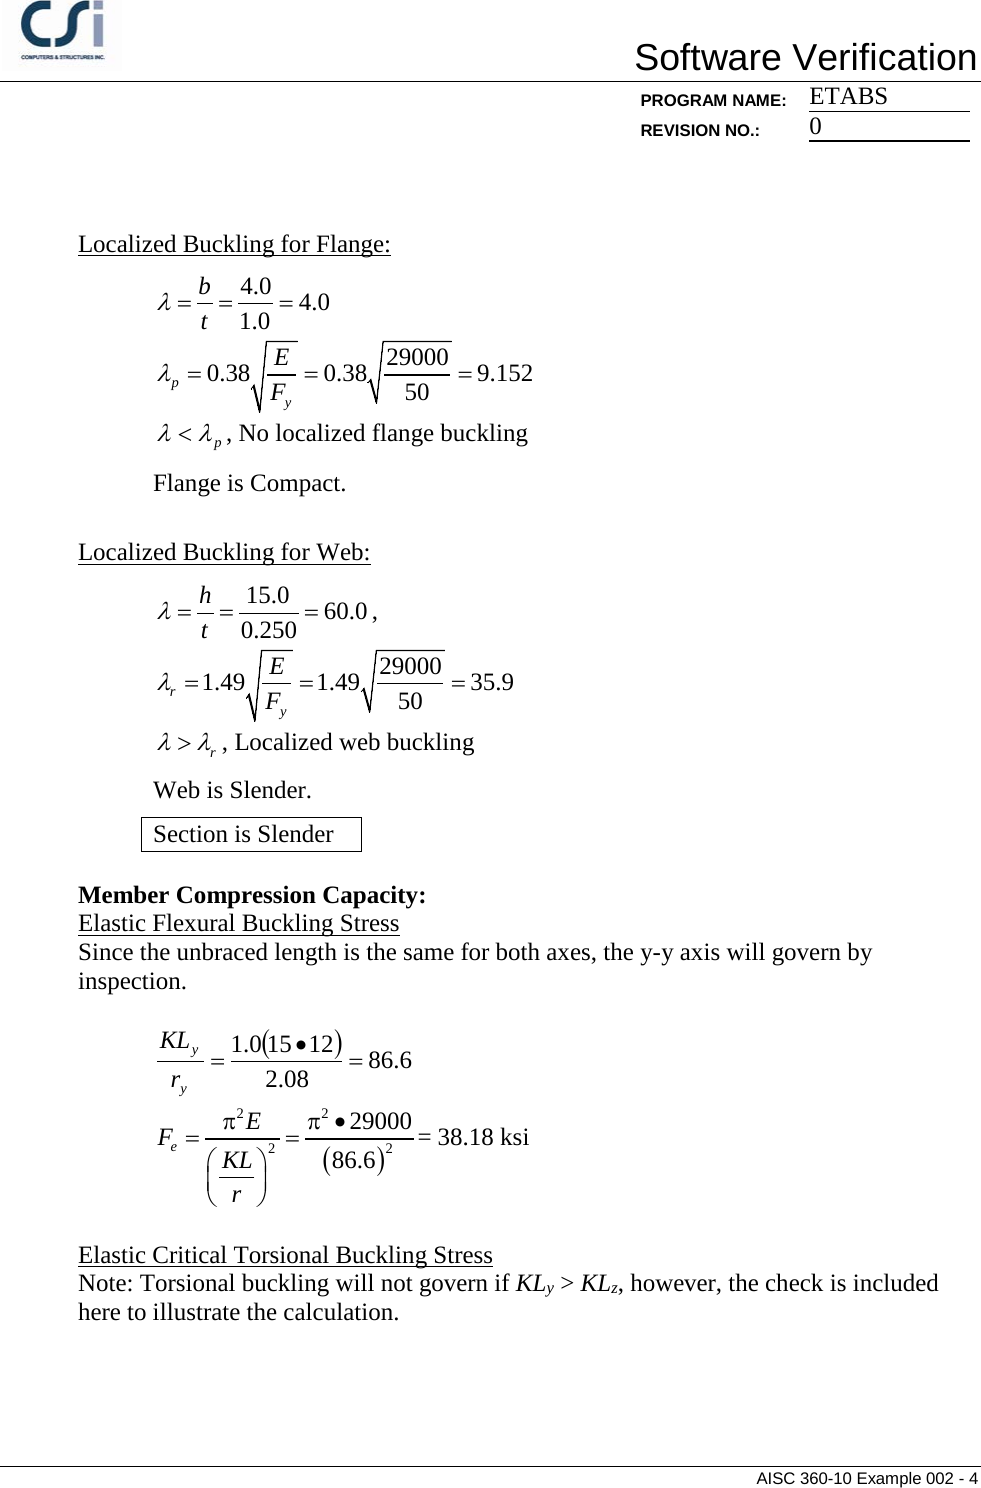 Page 4 of 6 - Contents AISC 360-10 Example 002